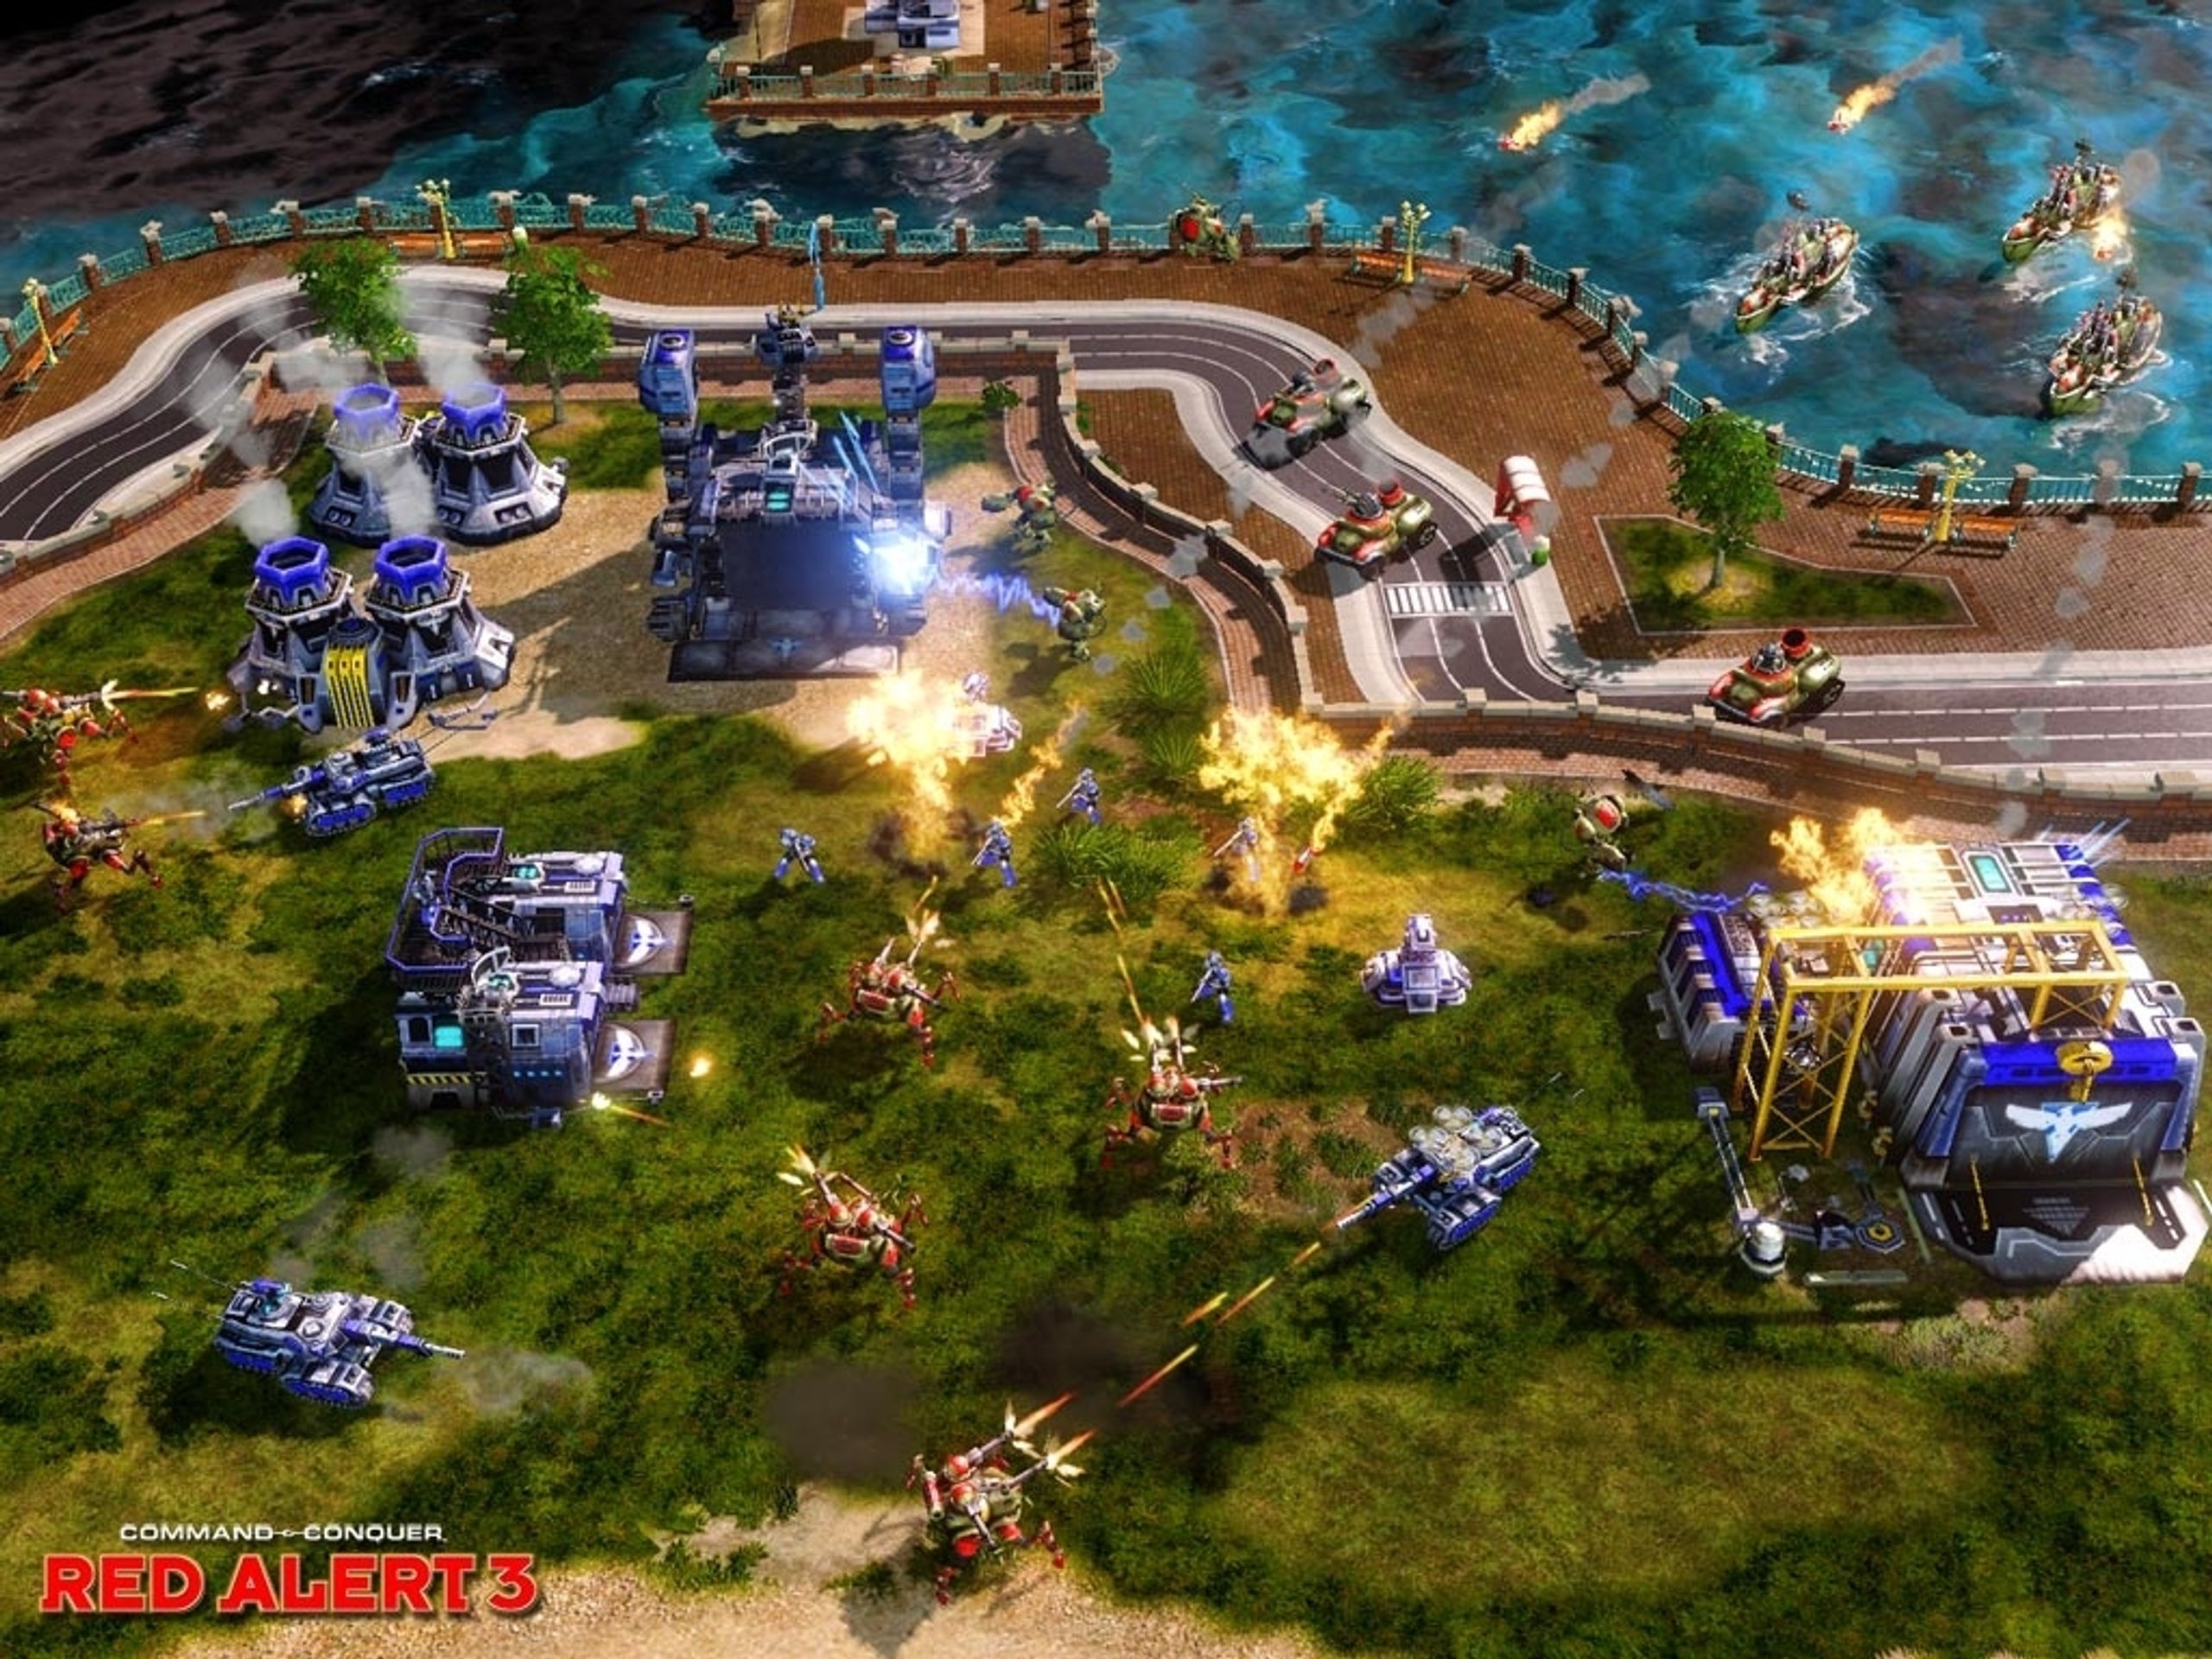 Command & Conquer: Red Alert 3 - Red Alert 3 galerie (12/16)